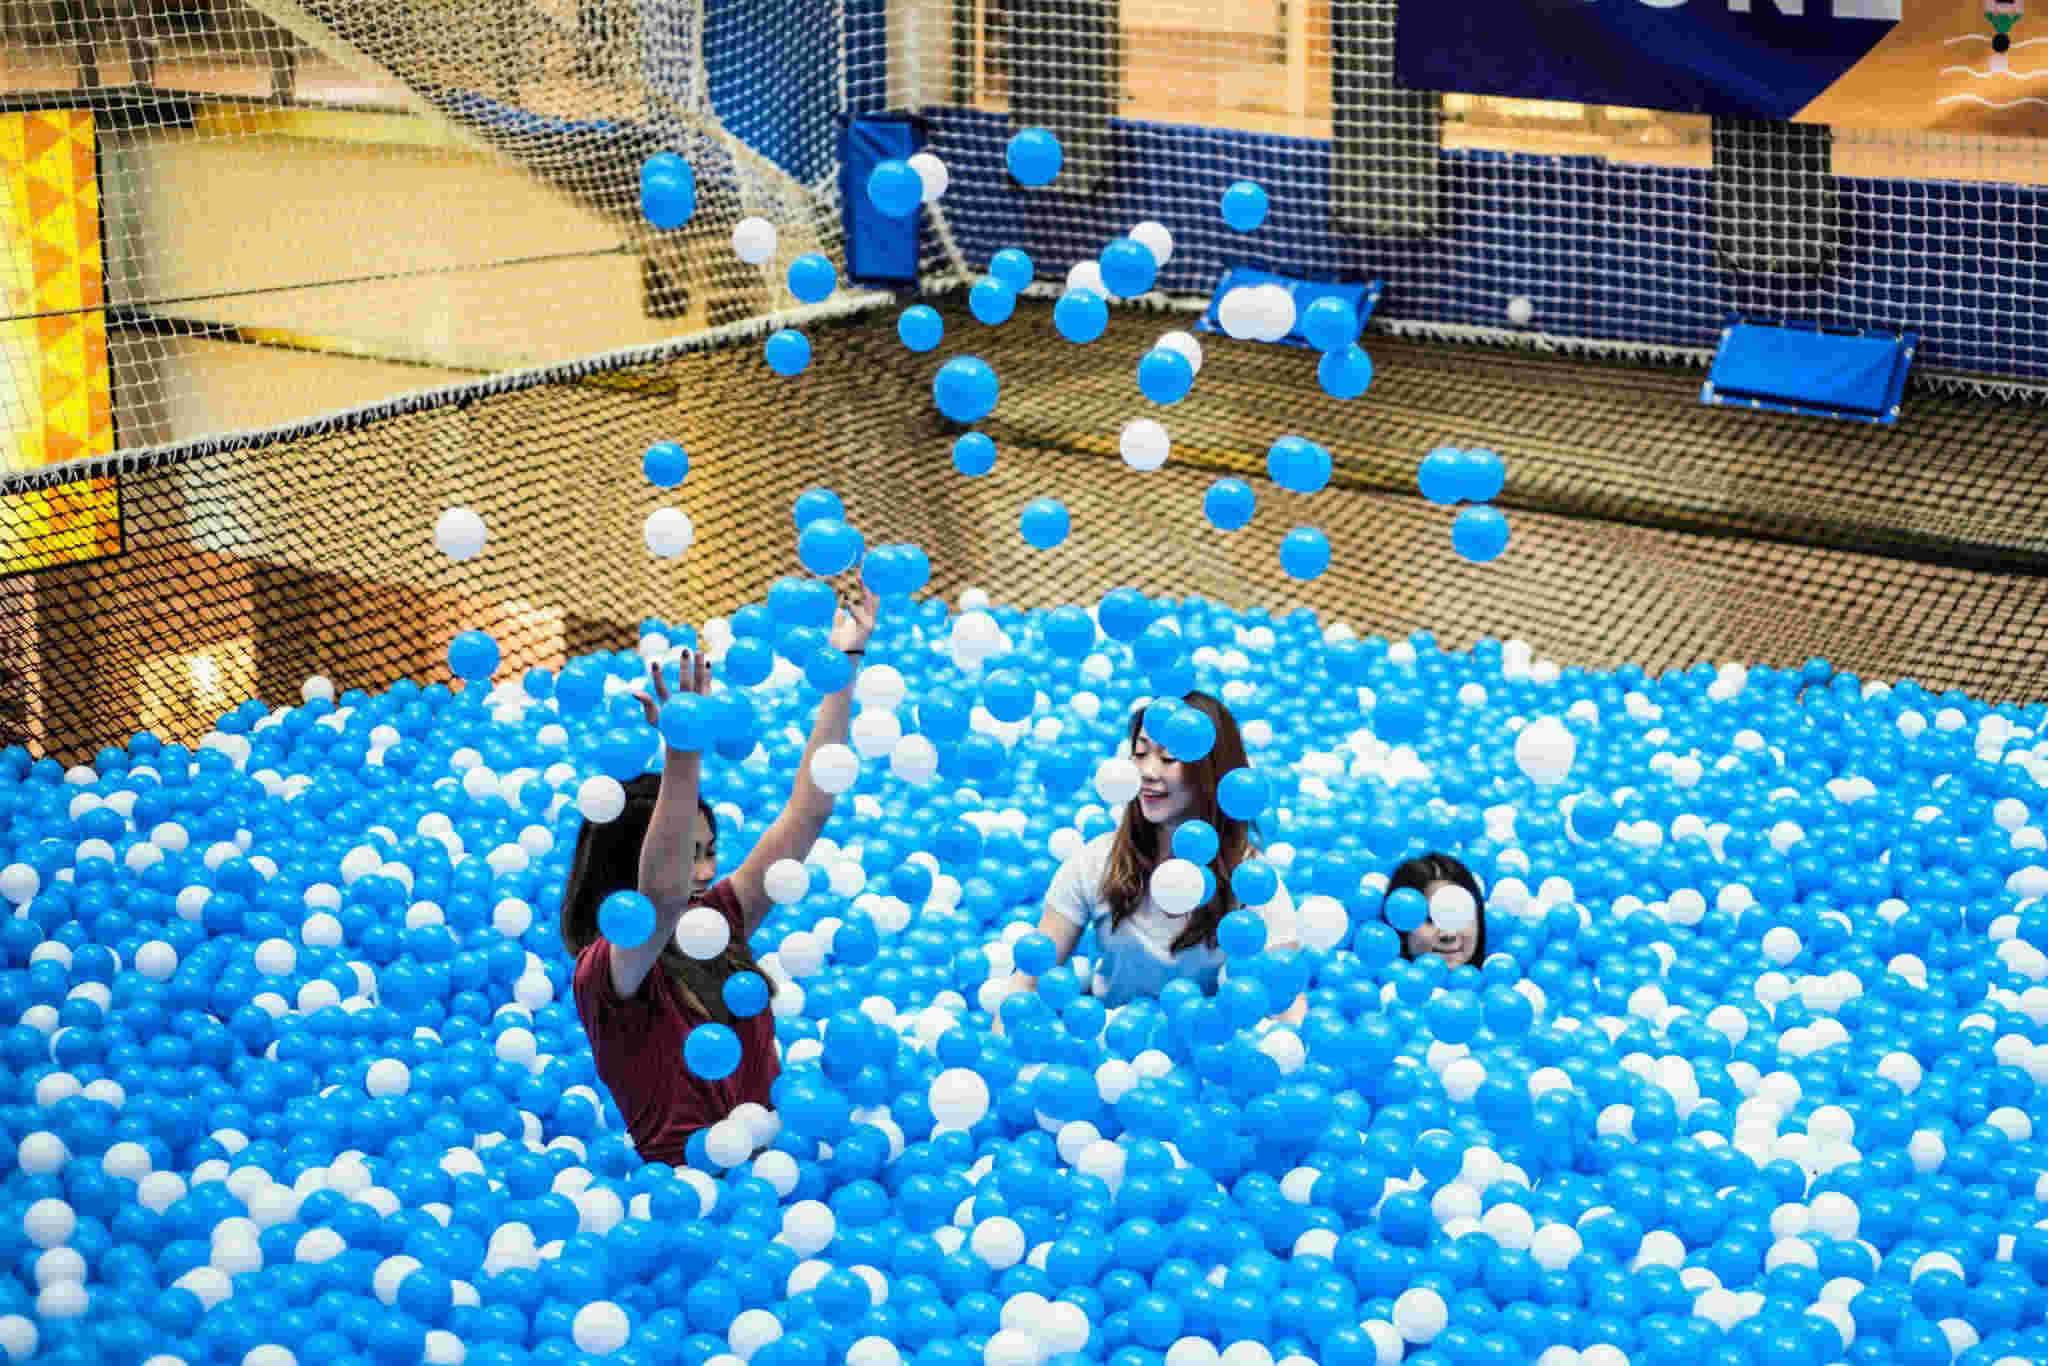 Swim In The Floating Ball Pit